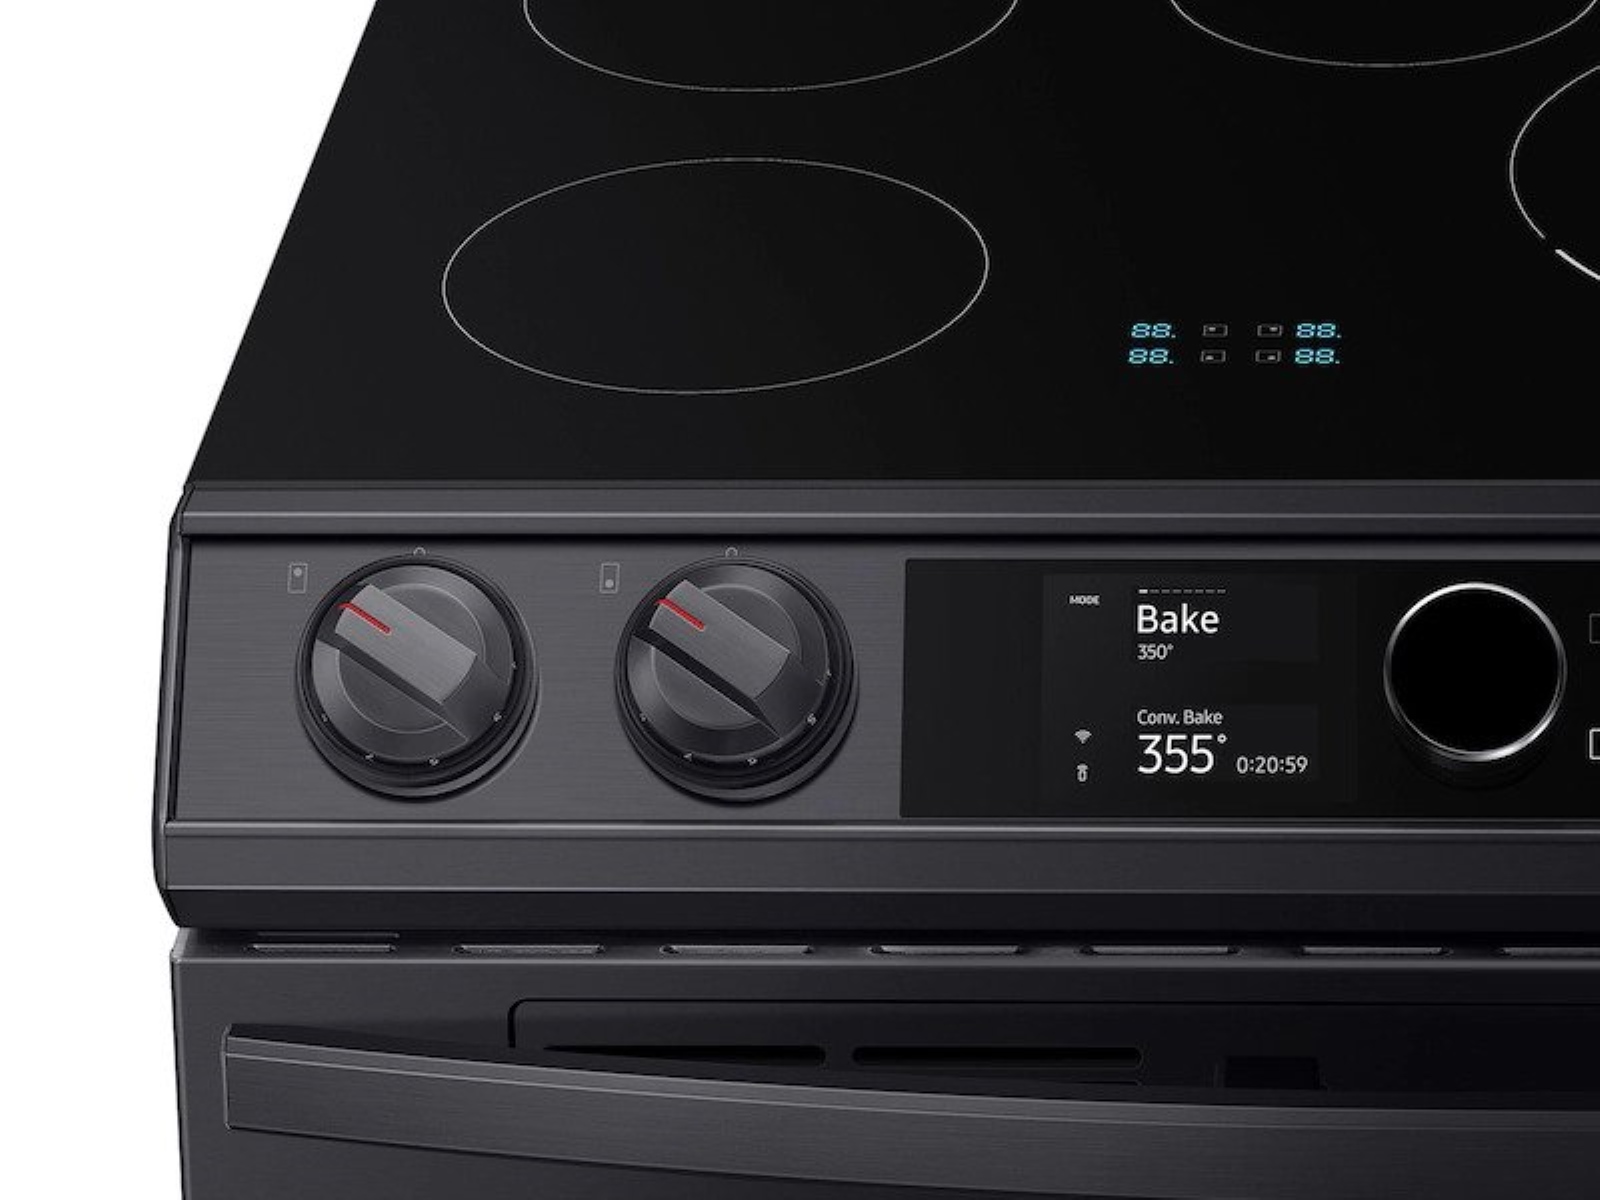 How To Fix The Error Code C-70 For Samsung Induction Range